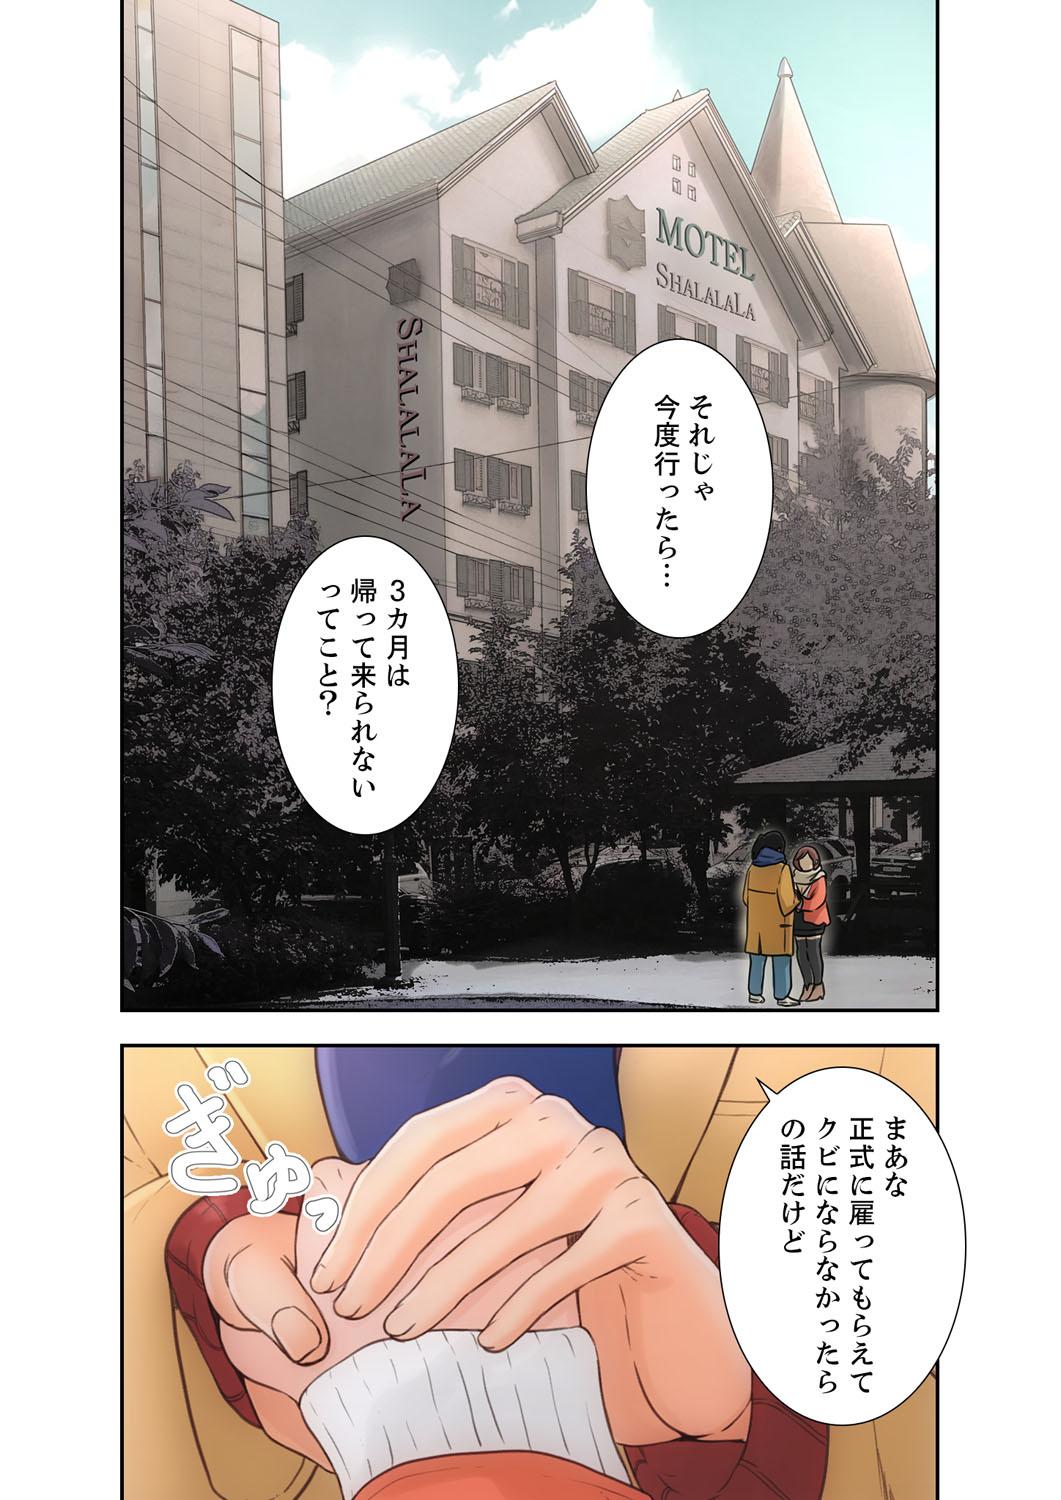 Nut 解禁 1-5 Bisexual - Page 2